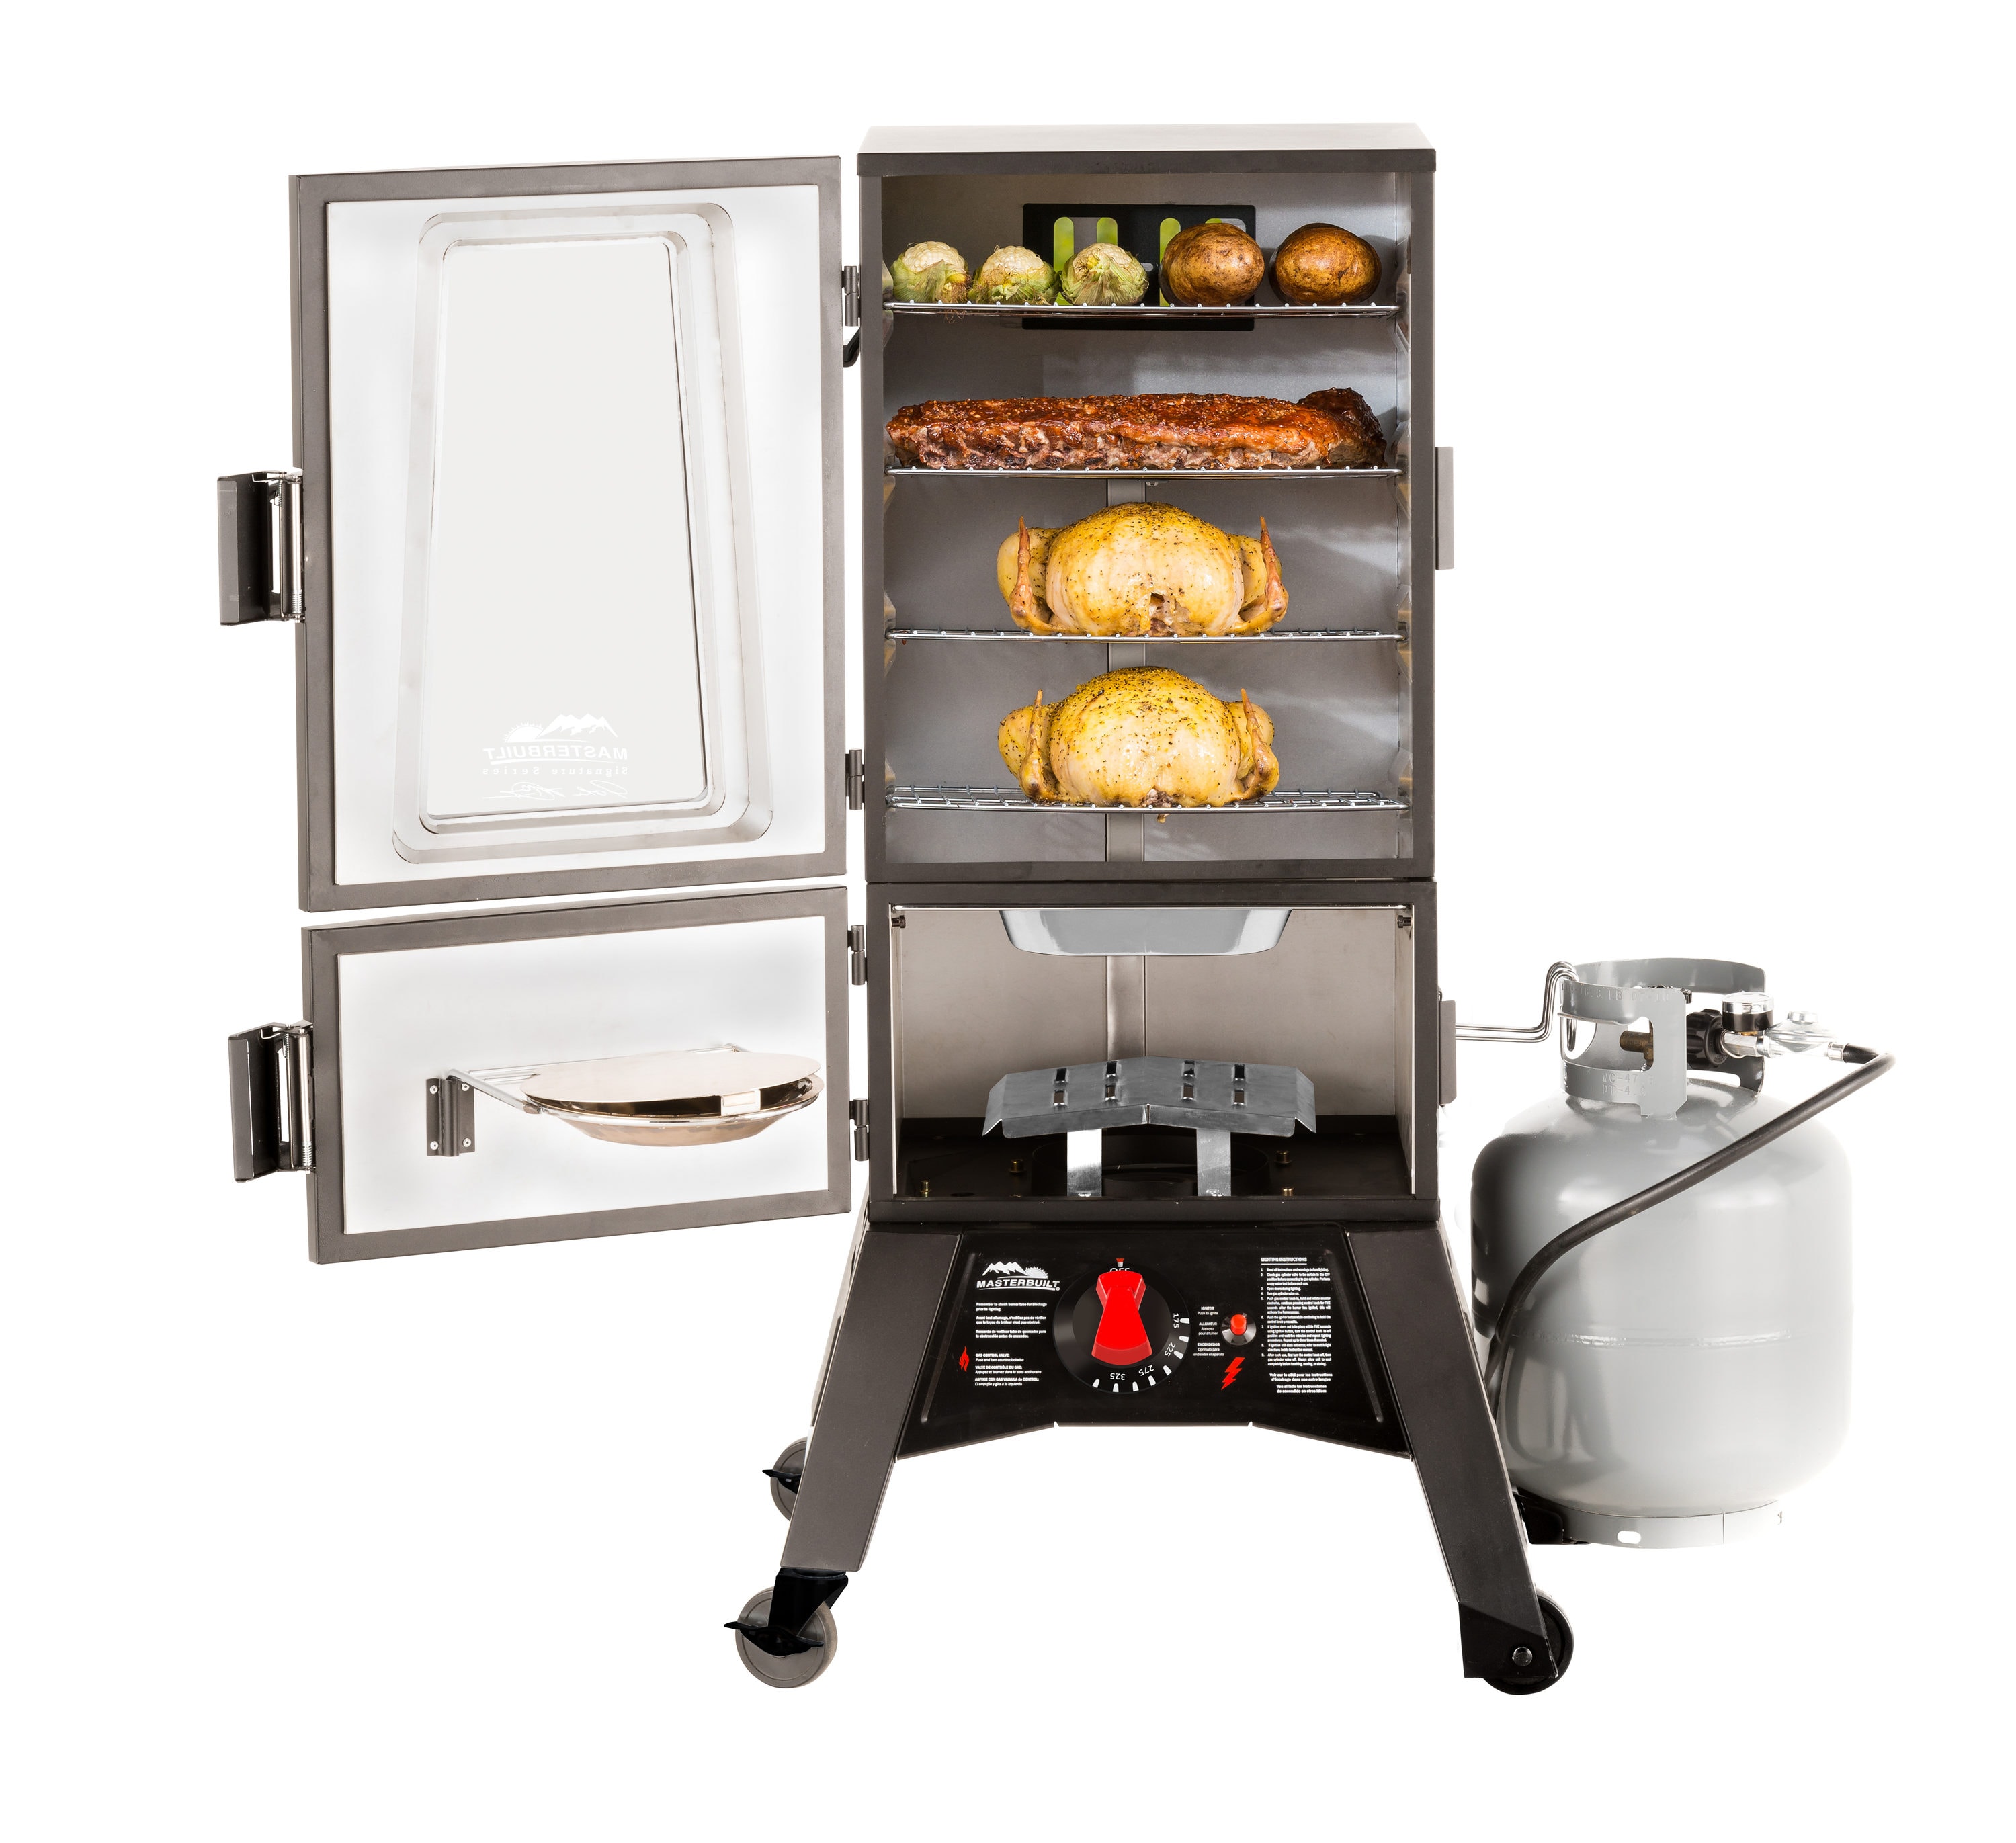 Masterbuilt's propane smoker with thermostat is made for cookouts at  $339.50 (2022 low)